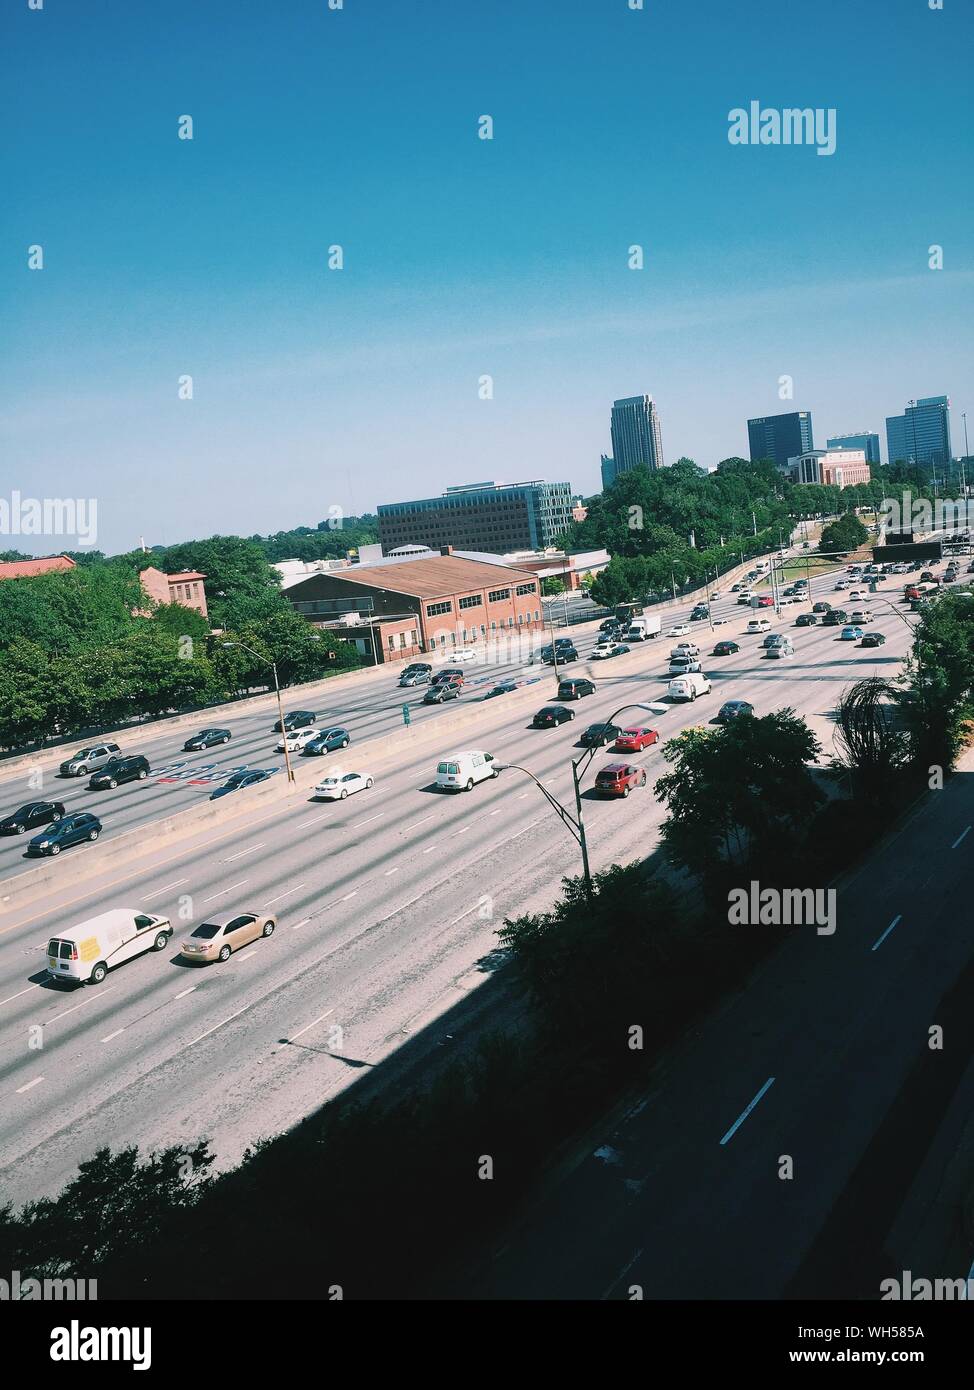 High Angle View Of Vehicles On Two Lane Highway During Sunny Day Stock Photo